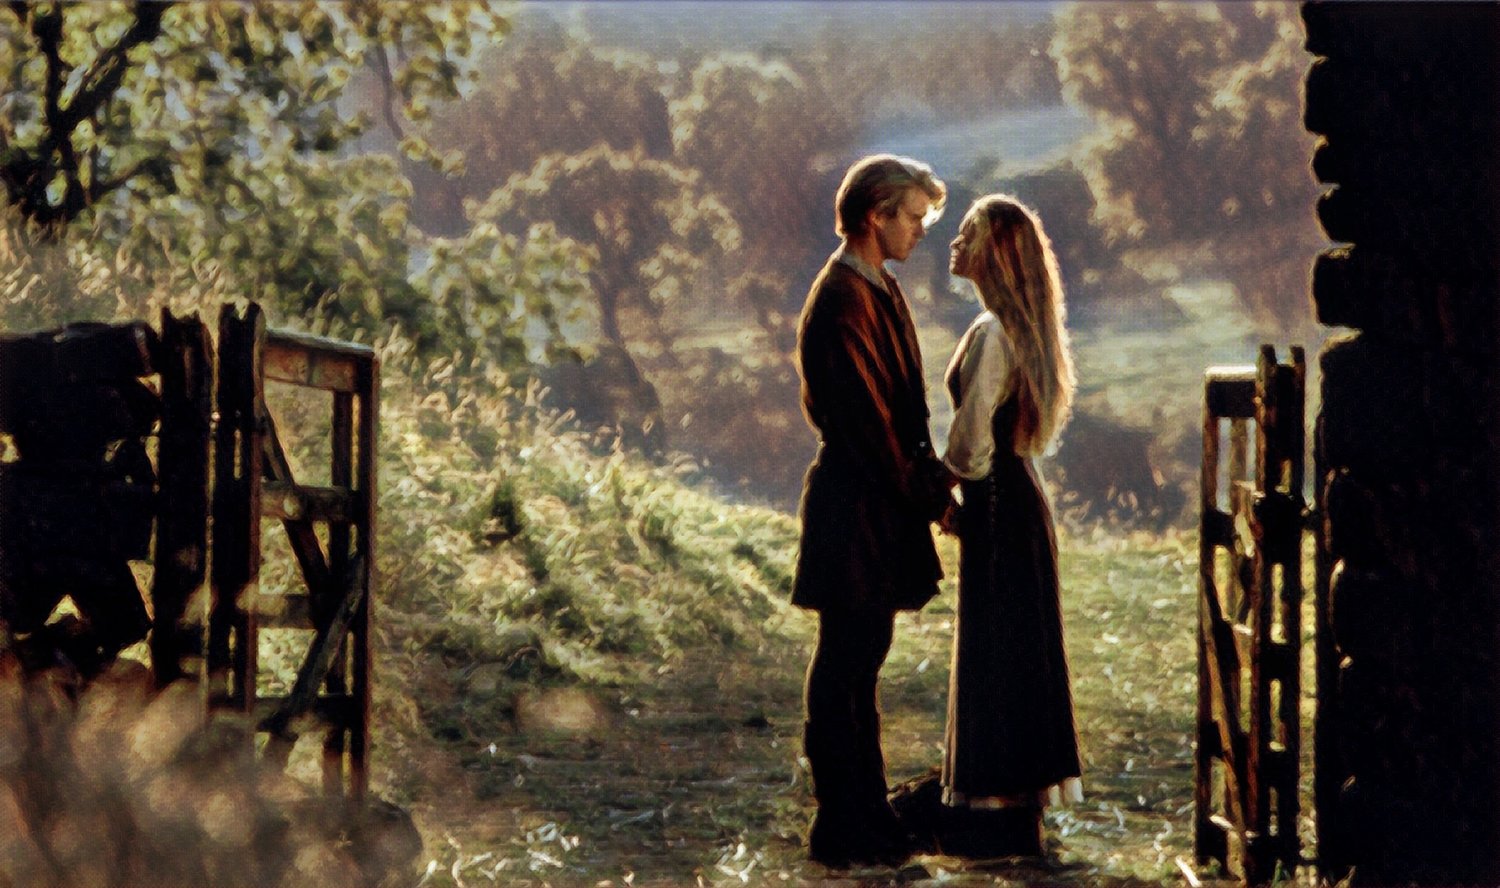 The Princess Bride, minutes 40 to 42